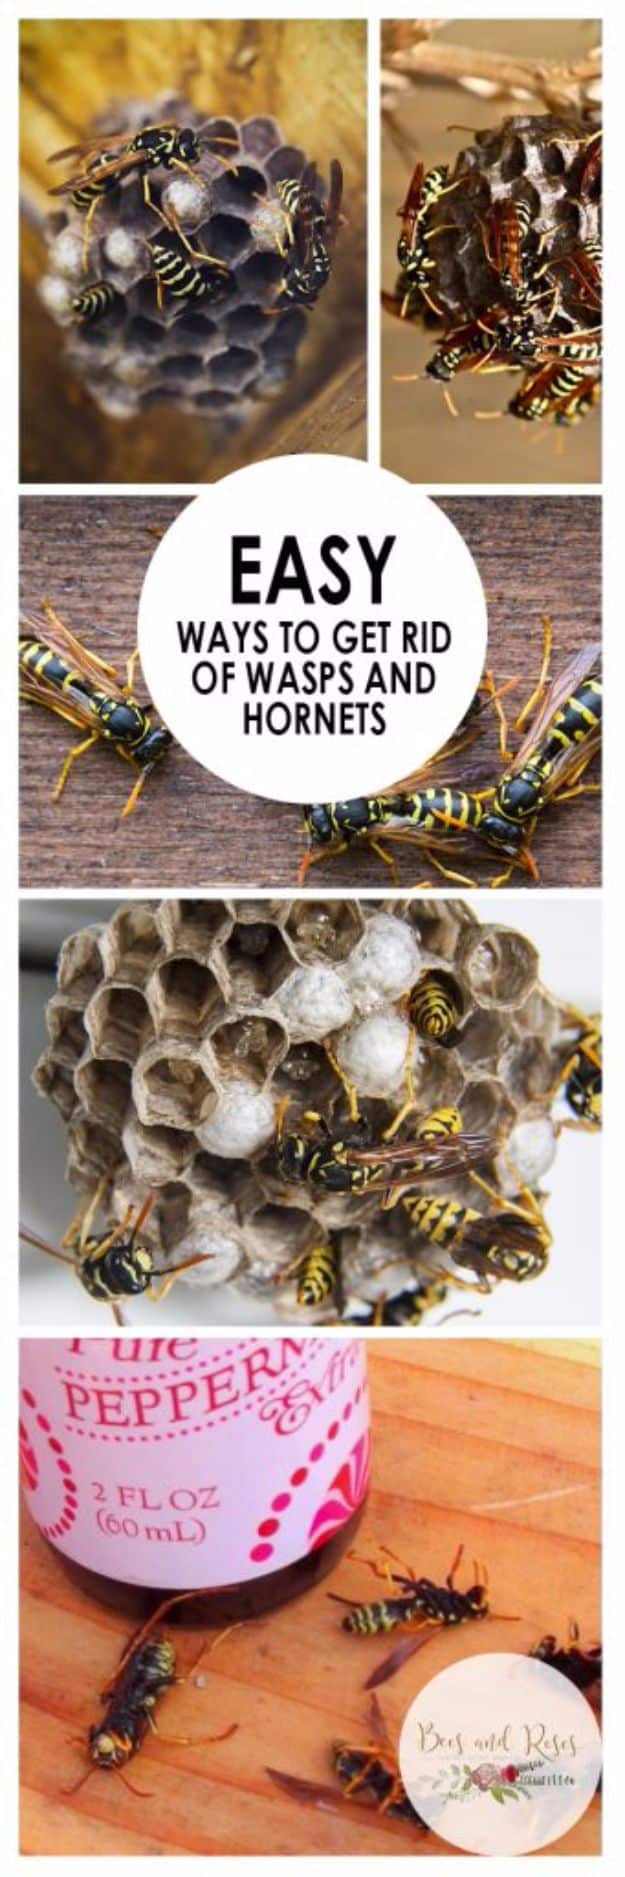 Best Ways to Get Rid of Bugs - Easy Way To Get Rid Of Wasps And Hornets - Easy Tips and Tricks to Get Rid of Roaches, Ants, Fleas and Flies - DIY Ways To Exterminate and Elimiate Pests from Your Home and Yard, Picnics and Outdoor Barbecue 